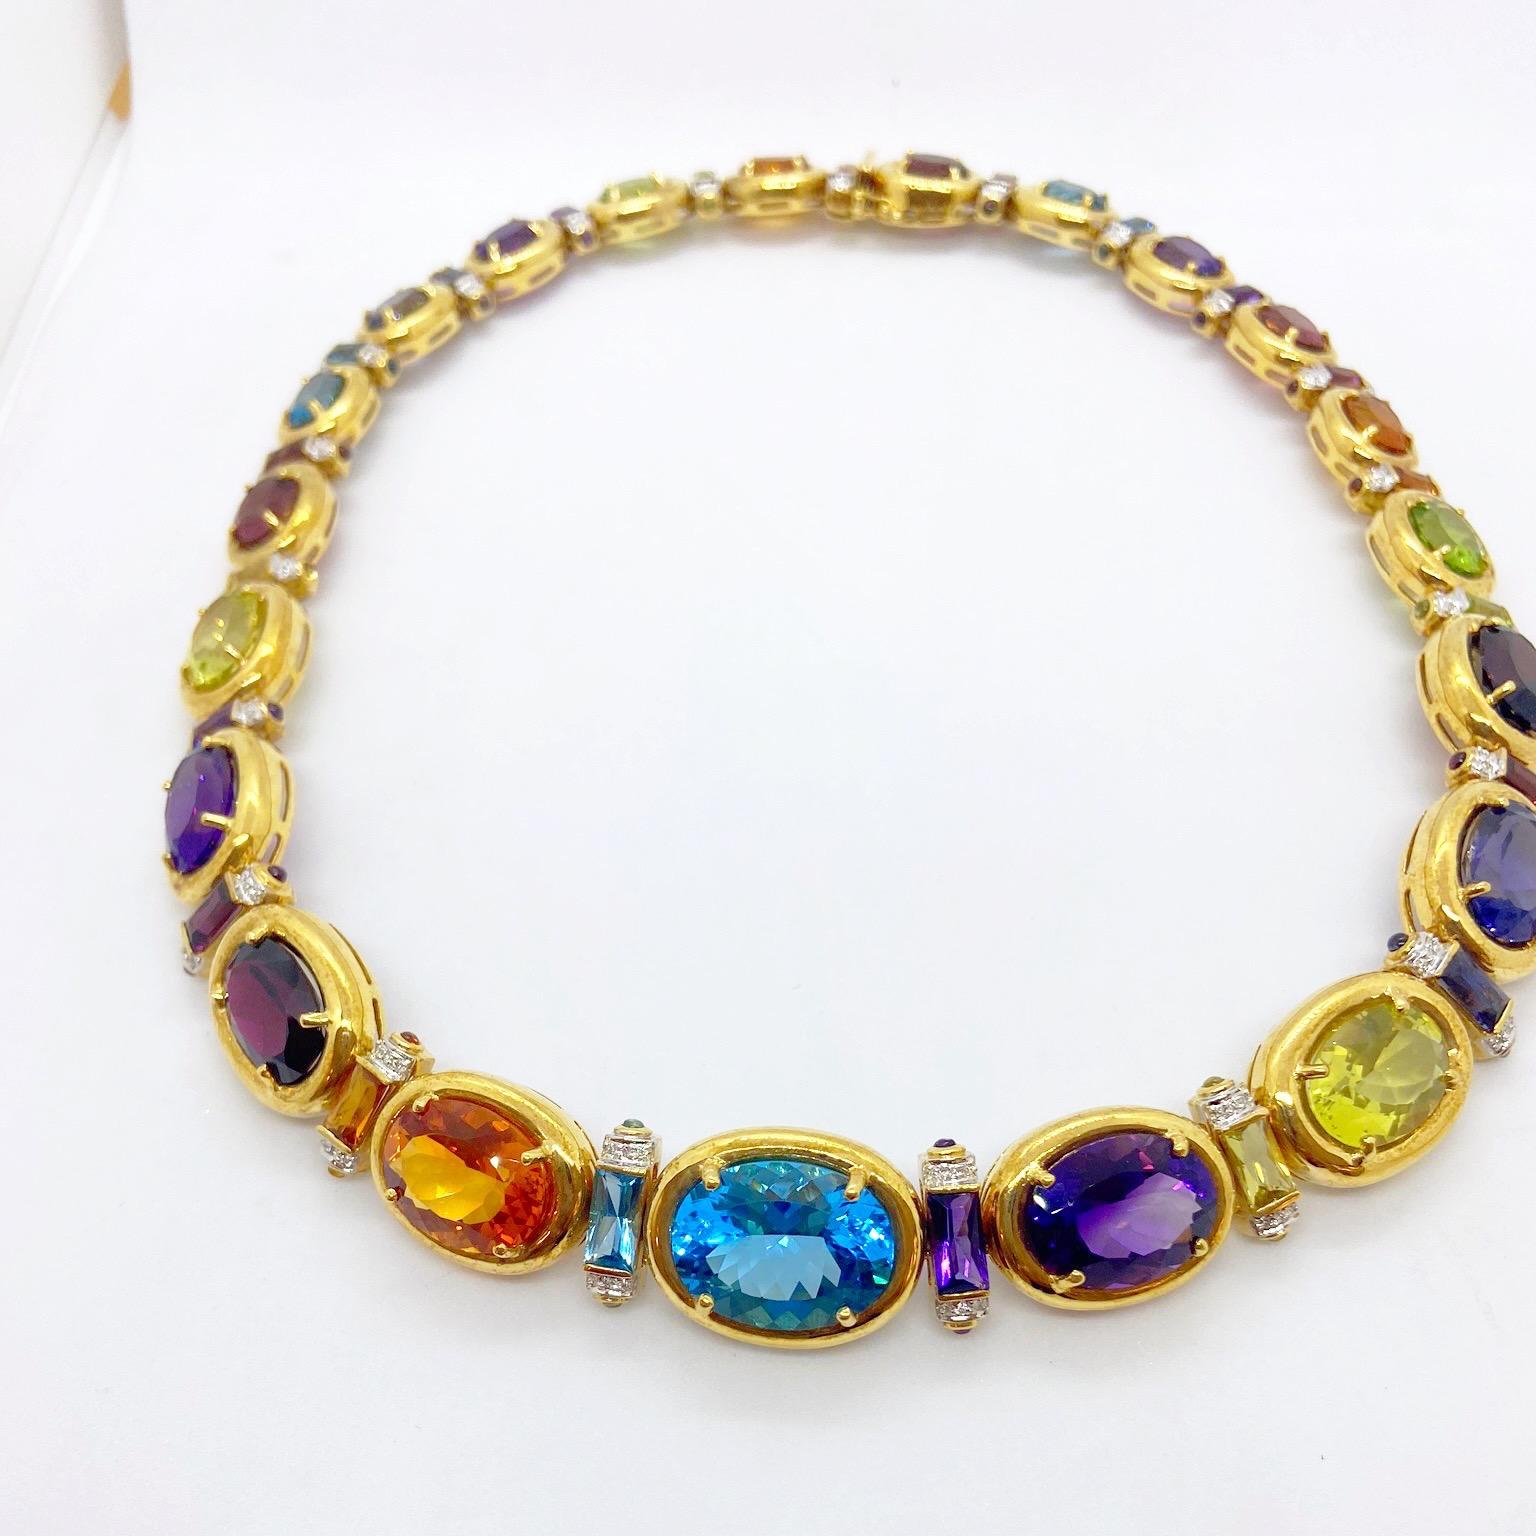 Brighten your day with this amazing Semi Precious colorful necklace.
The necklace is designed with 21 ovals in Blue Topaz, Citrine, Garnet, Amethyst, Lemon Quartz, Peridot ,Pink Tourmaline and Iolite. Each stone is set in an 18 karat yellow gold